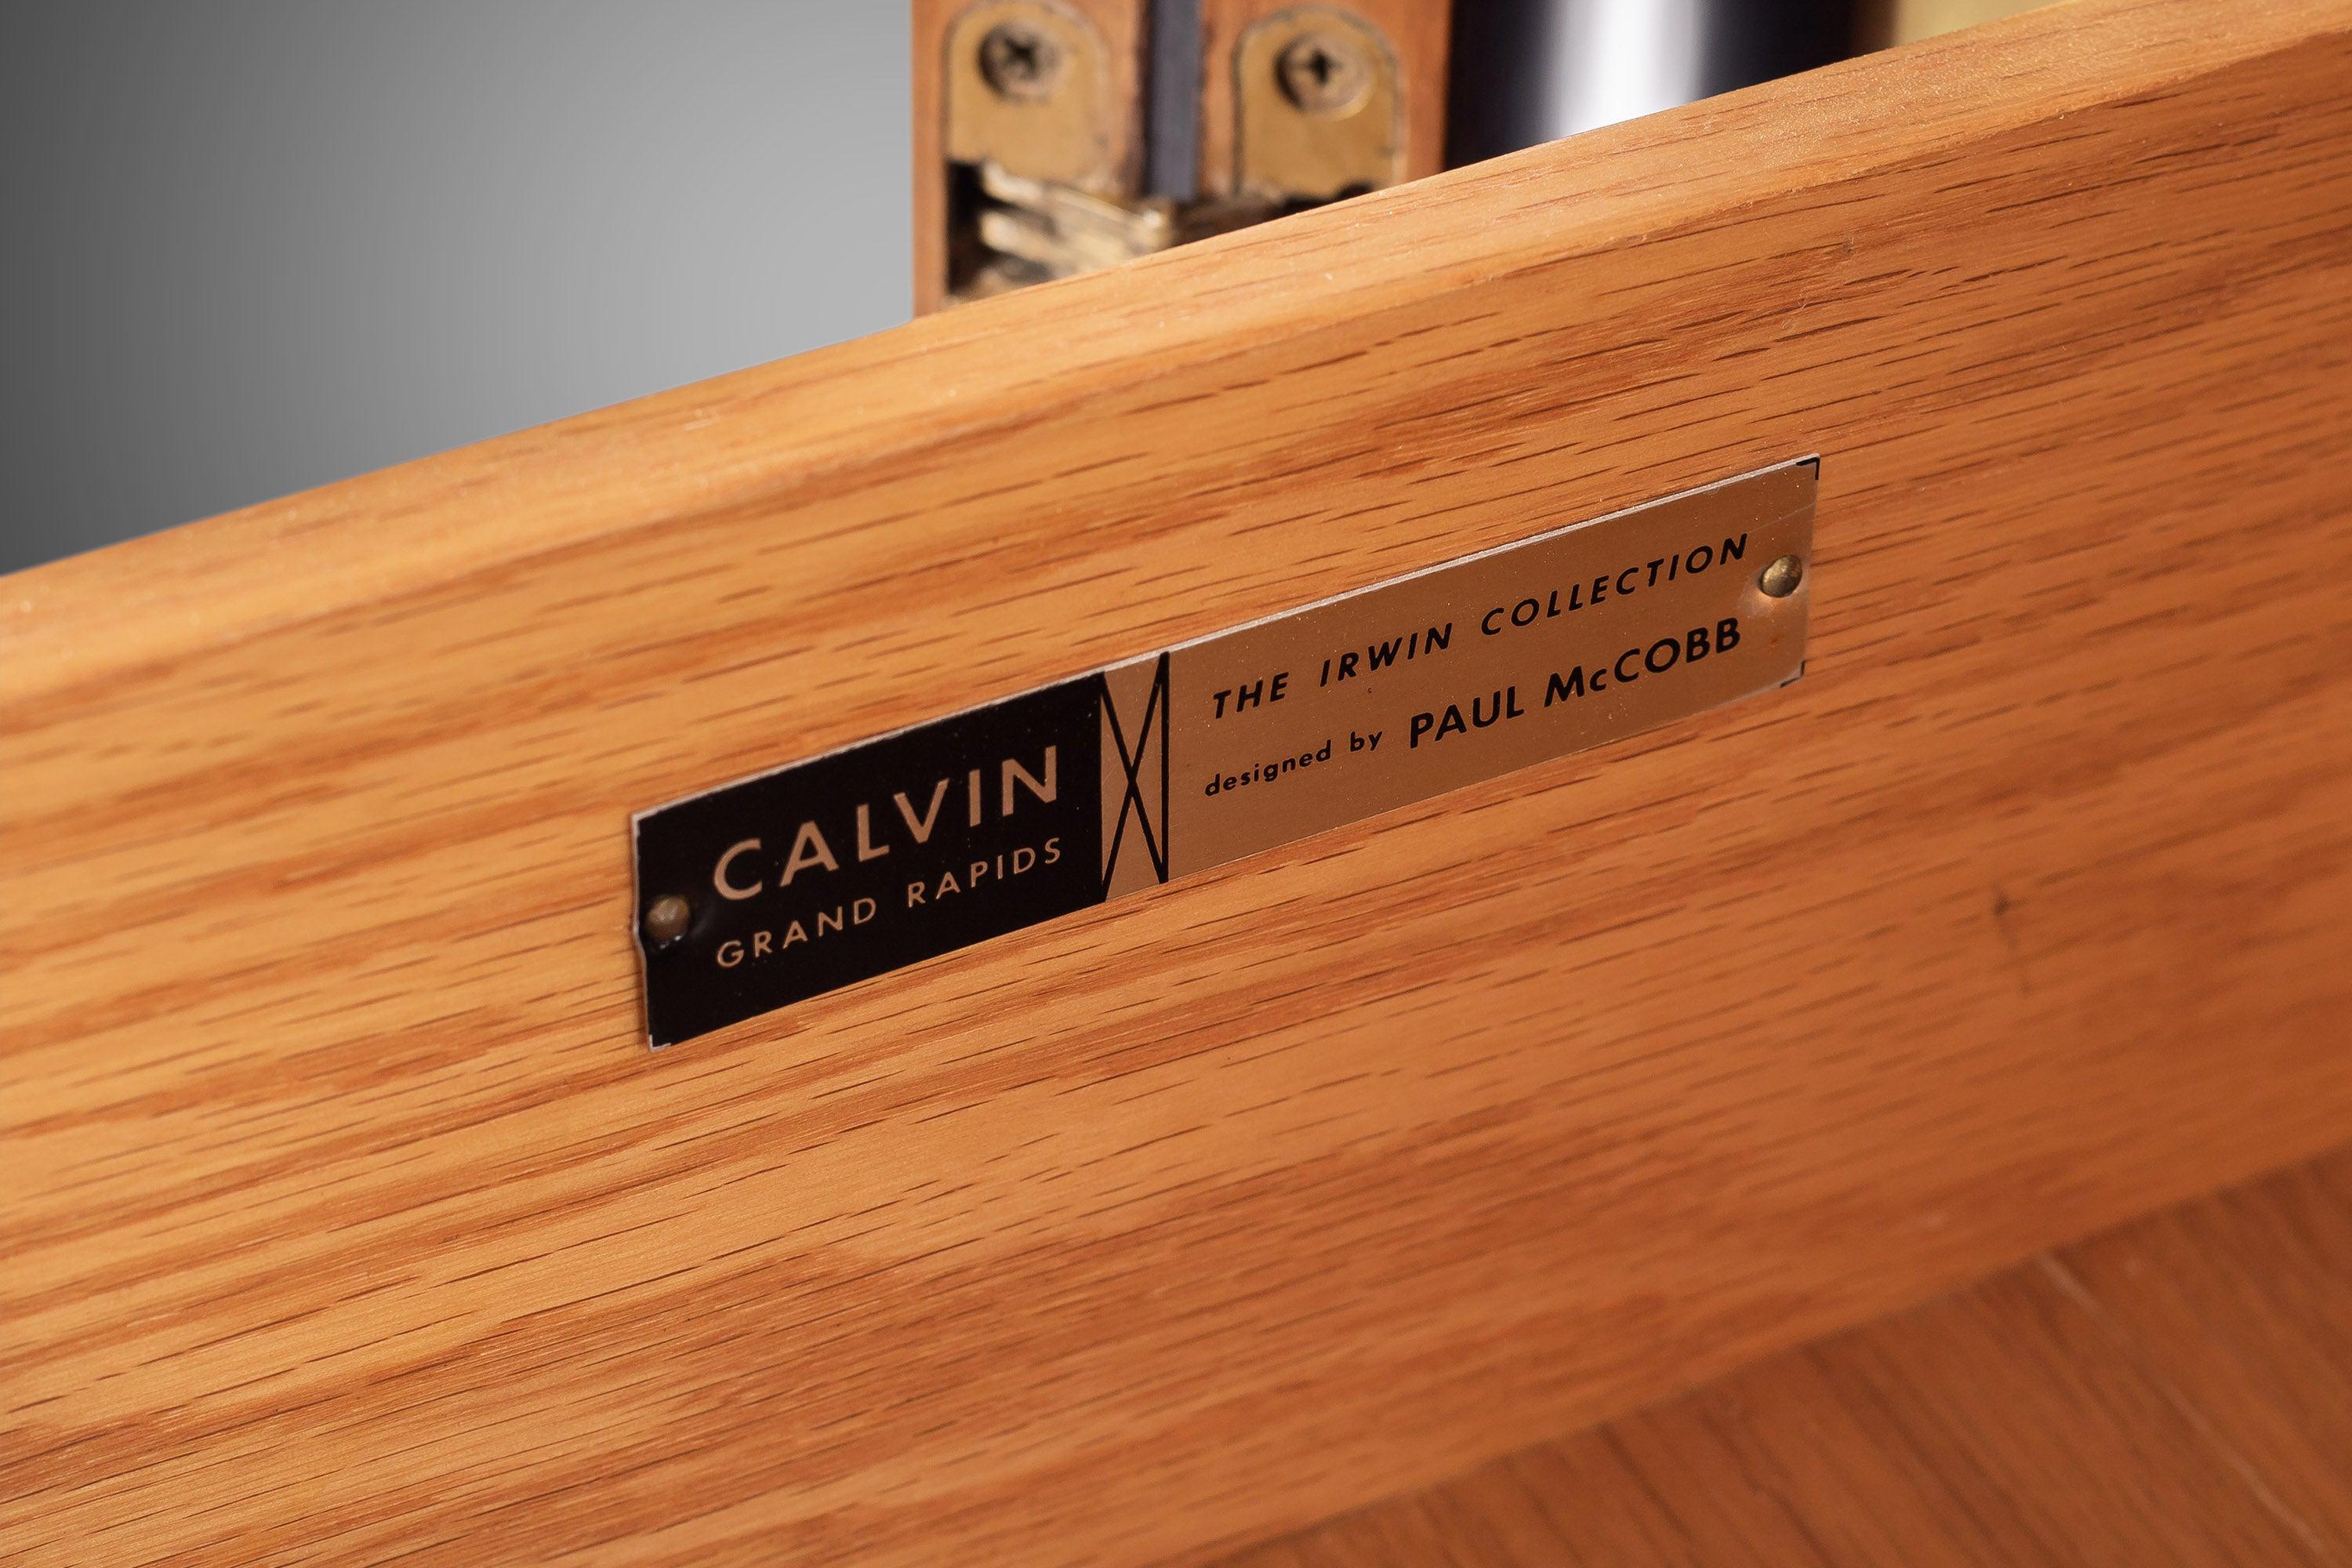 An exceptional Mid-Century Modern sideboard credenza or bar cabinet designed by Paul McCobb for his Irwin collection line for Calvin Furniture. The cabinet features stunning Honduran mahogany wood grain and sleek mid-century lines. An excellent